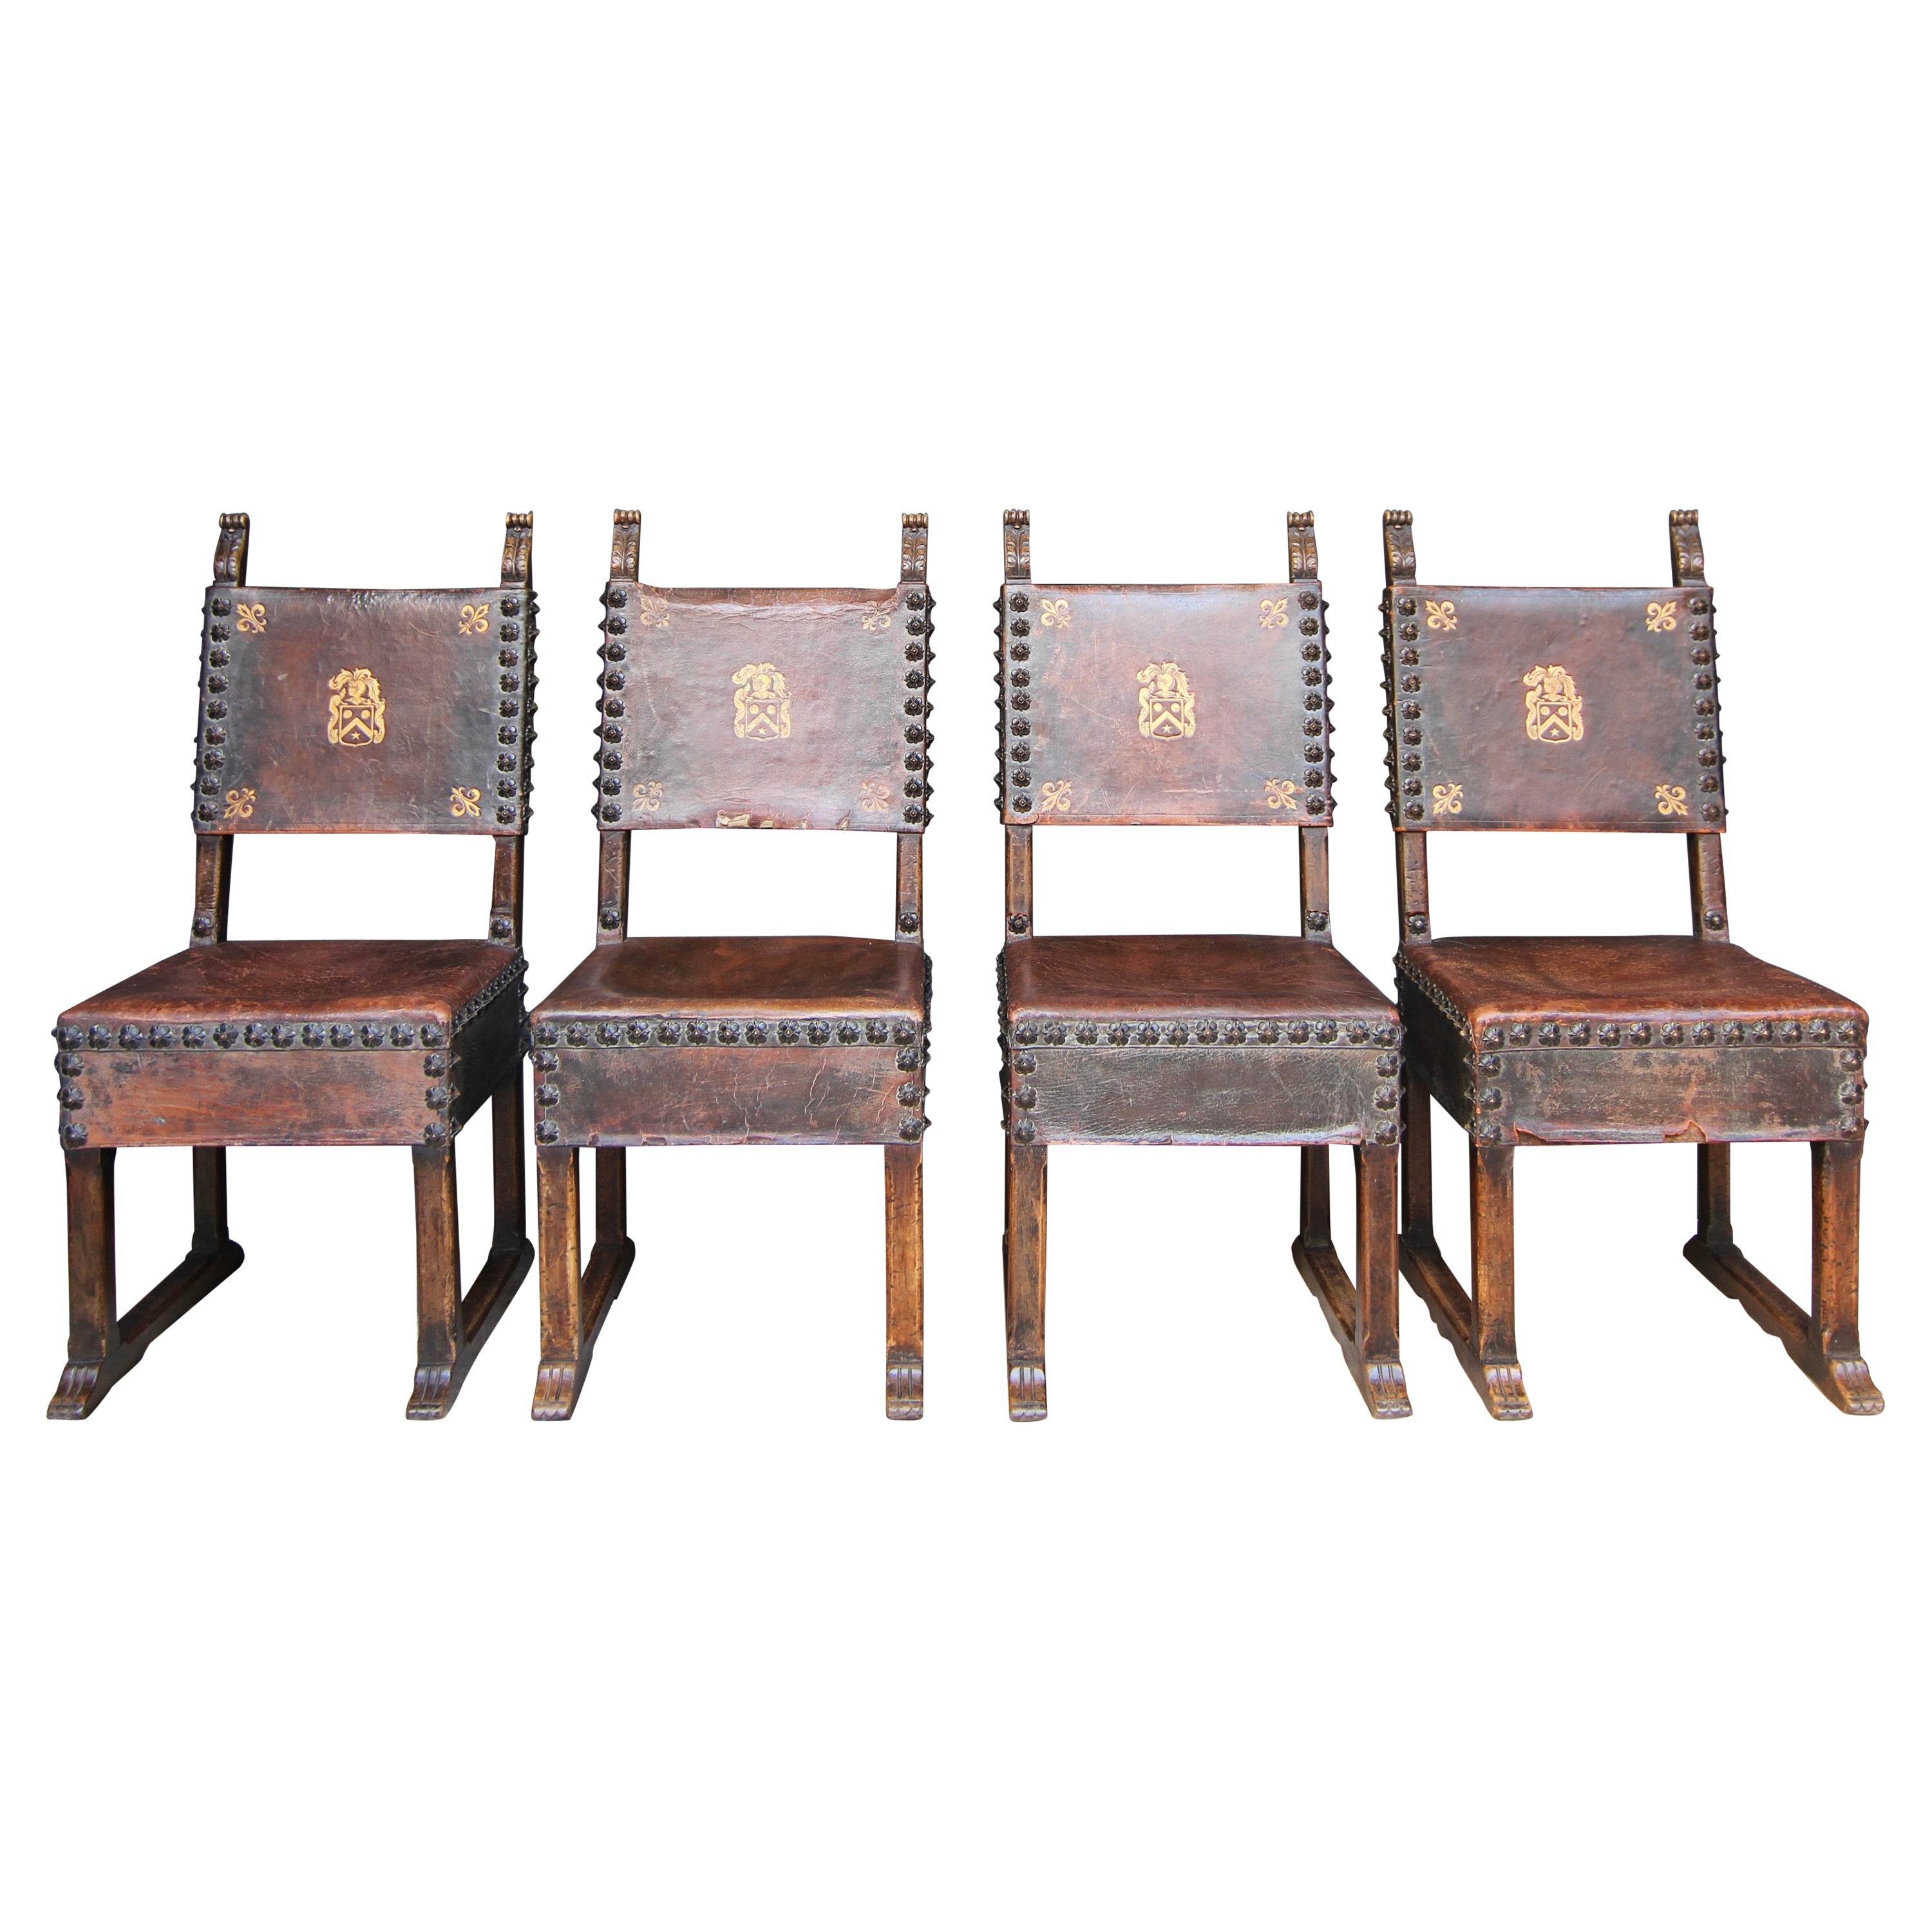 Set of 4 Walnut and Leather Renaissance Style Chairs by Krieger